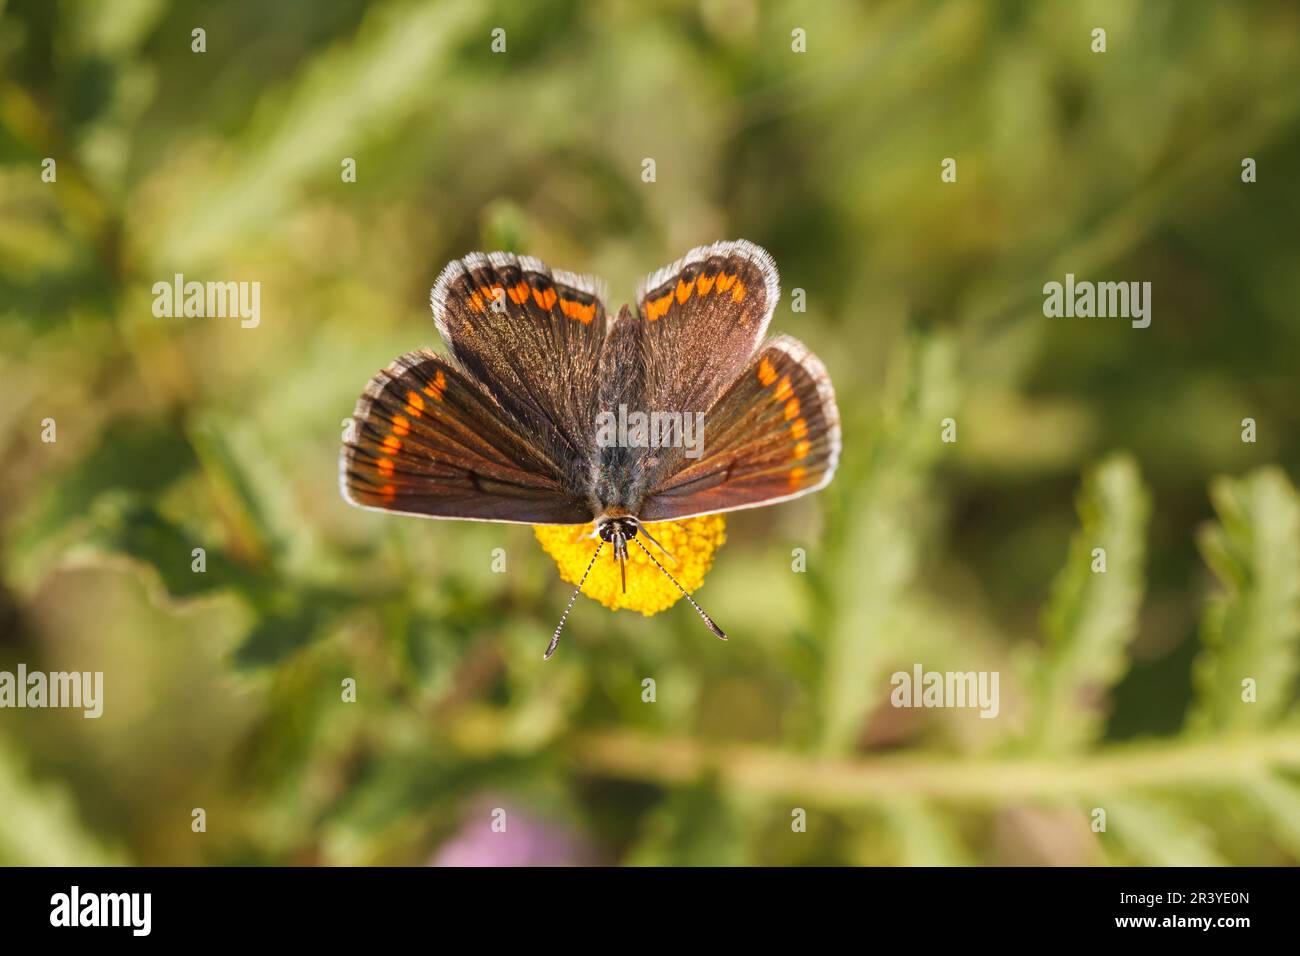 Aricia agestis, syn. Polyommatus agestis, known as the Brown argus butterfly Stock Photo